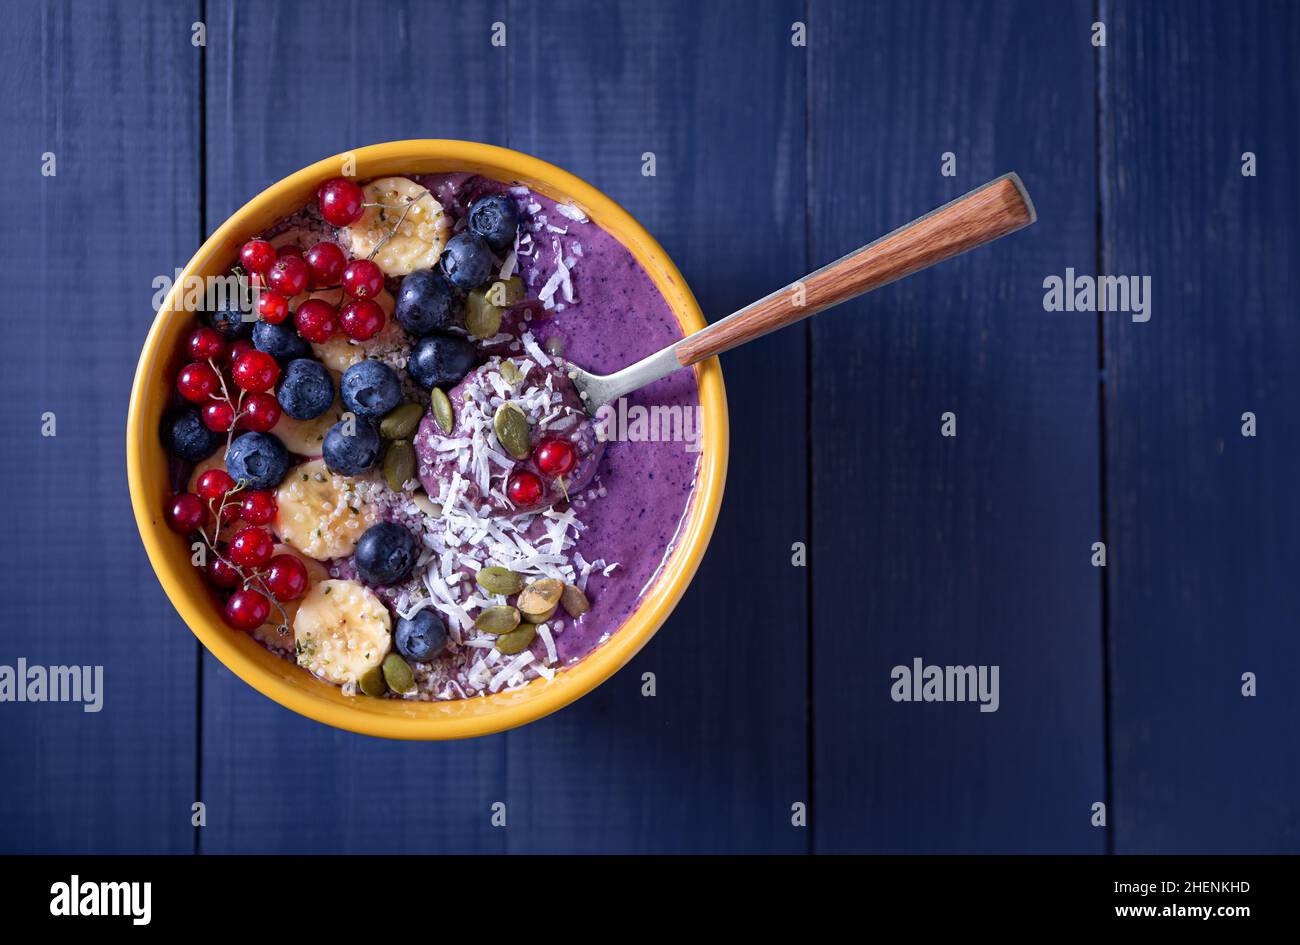 Overhead view of a healthy, organic raw food berry smoothie bowl on a blue wooden surface with copy space Stock Photo